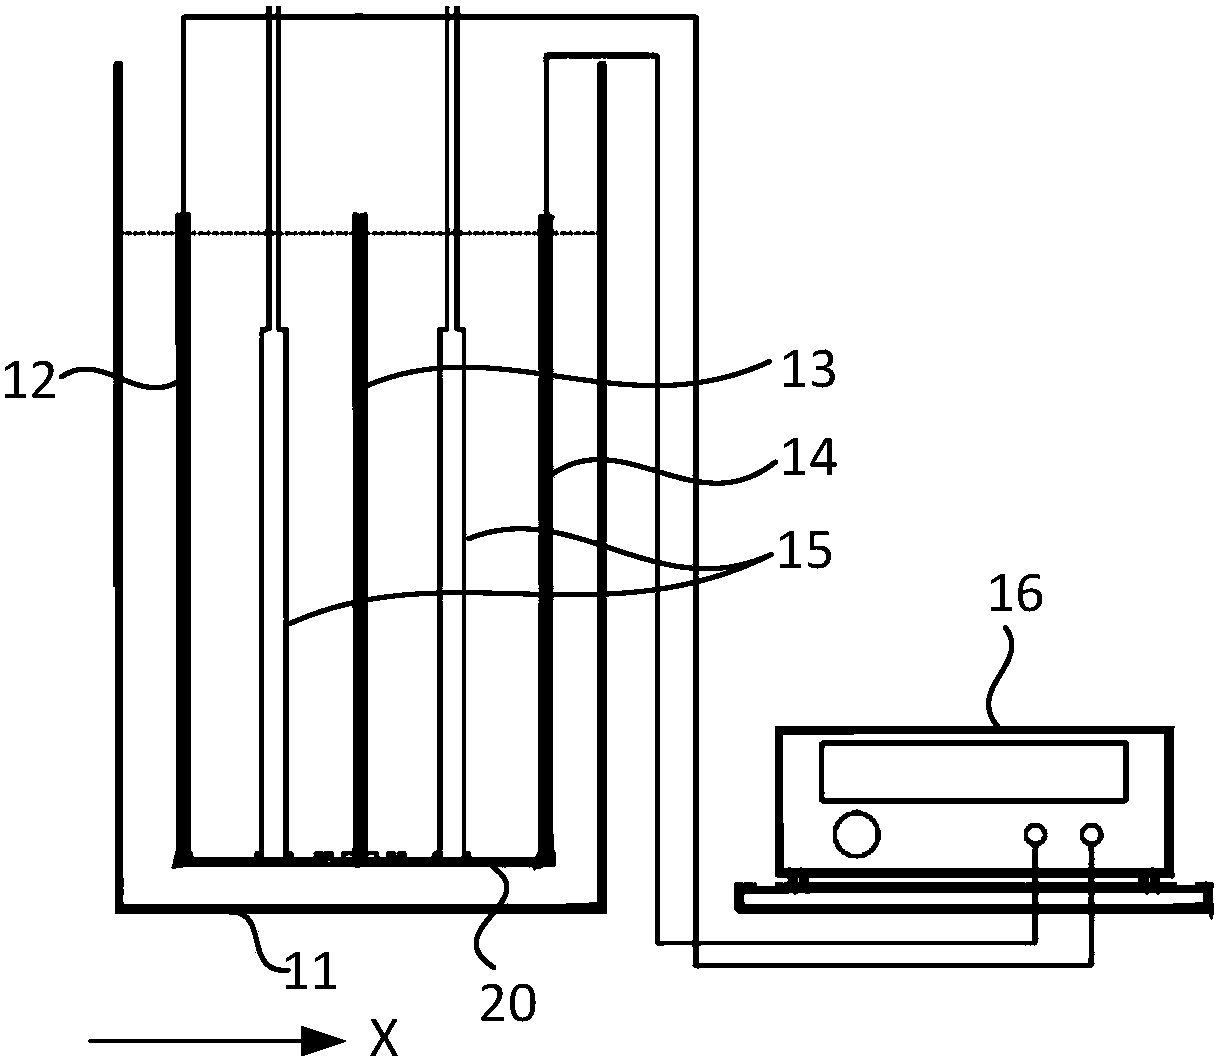 Electrochemical membrane biological sewage treating device